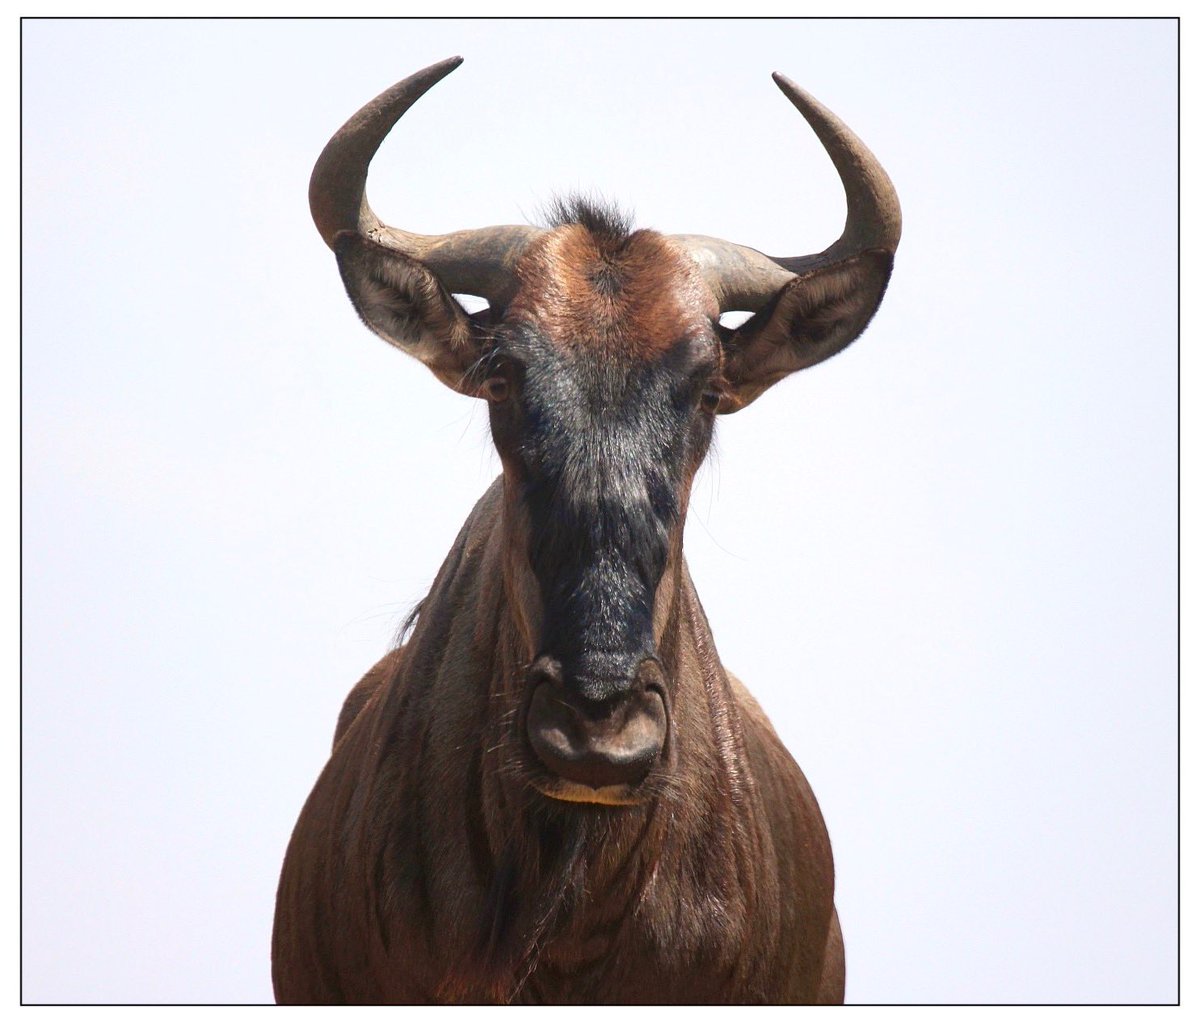 ..
👁️👁️ 
Looking at him. 
Looking at me.
A curious Wildebeest. #Gnu 

📸 My own.
🇿🇦 #MadikweGameReserve